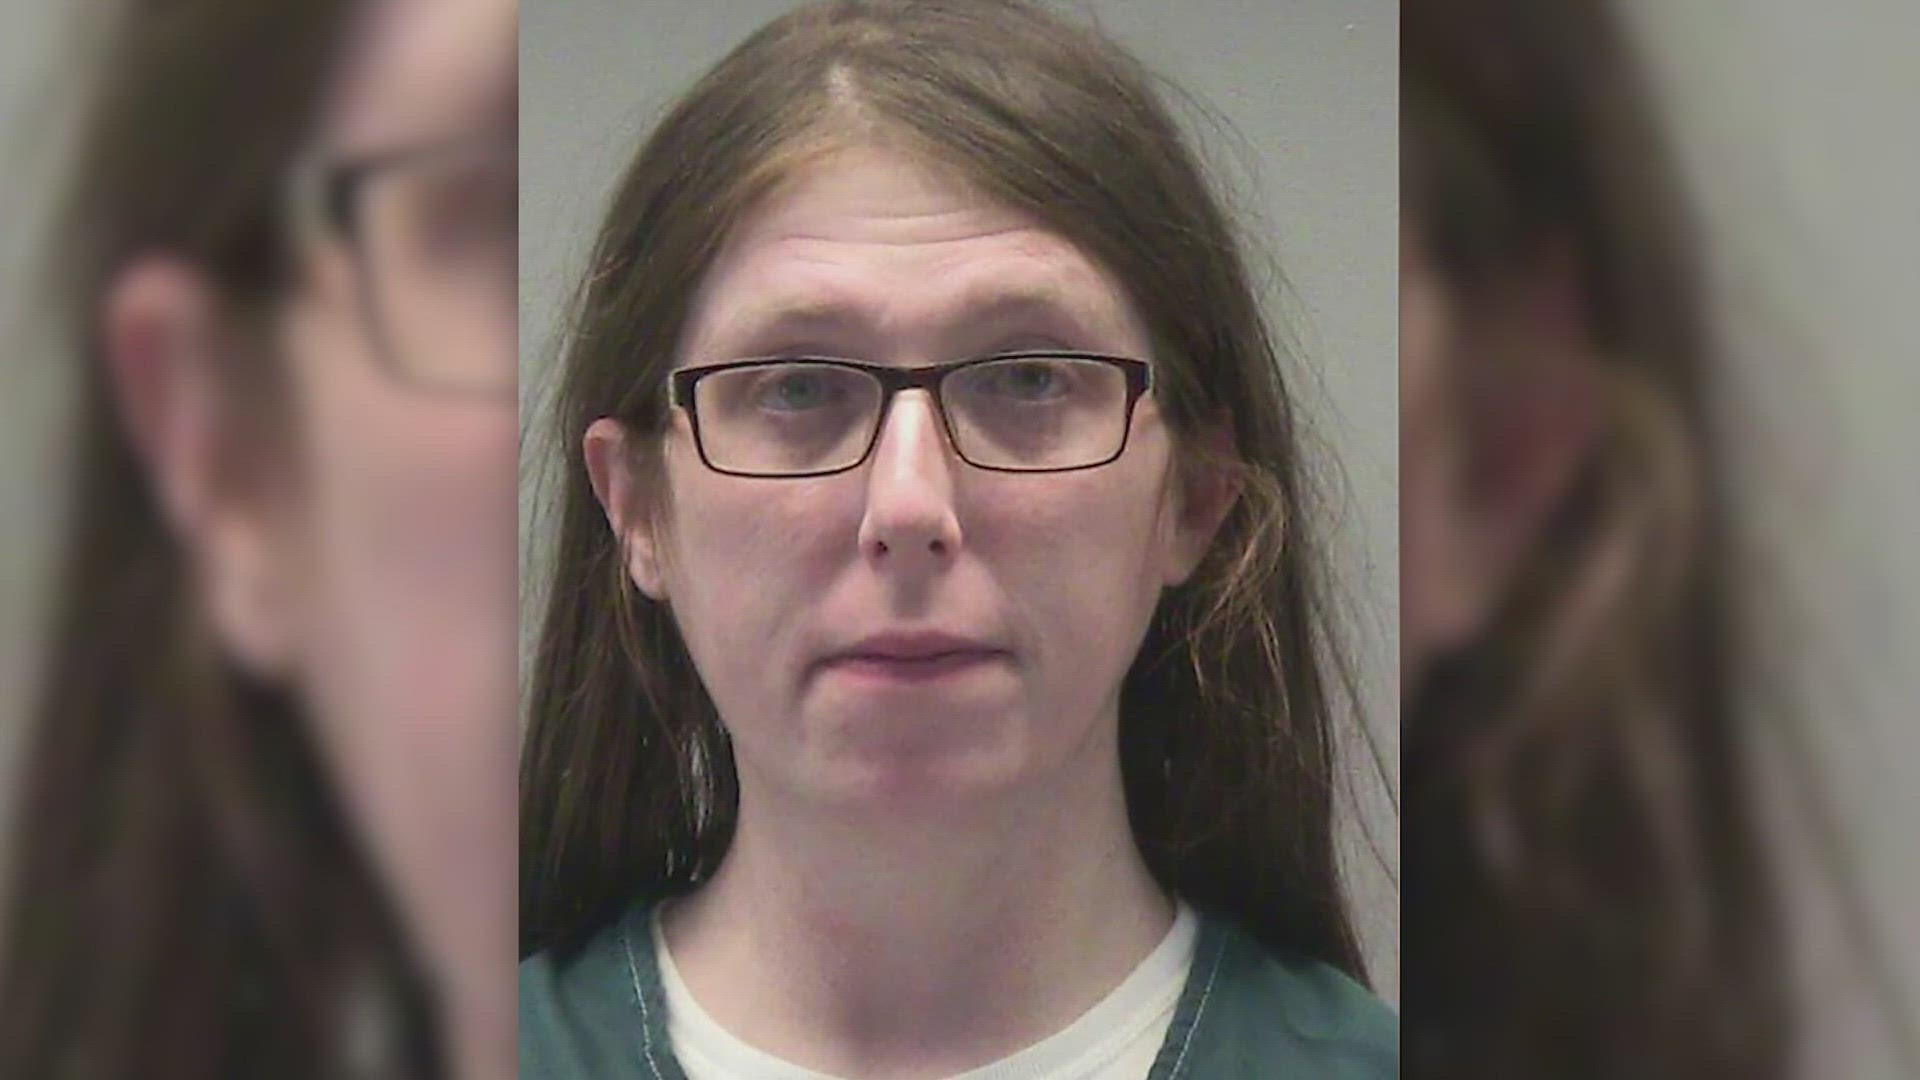 U.S. District Judge Amit Mehta sentenced Jessica Watkins, of Woodstock, Ohio, to eight years and six months behind bars.